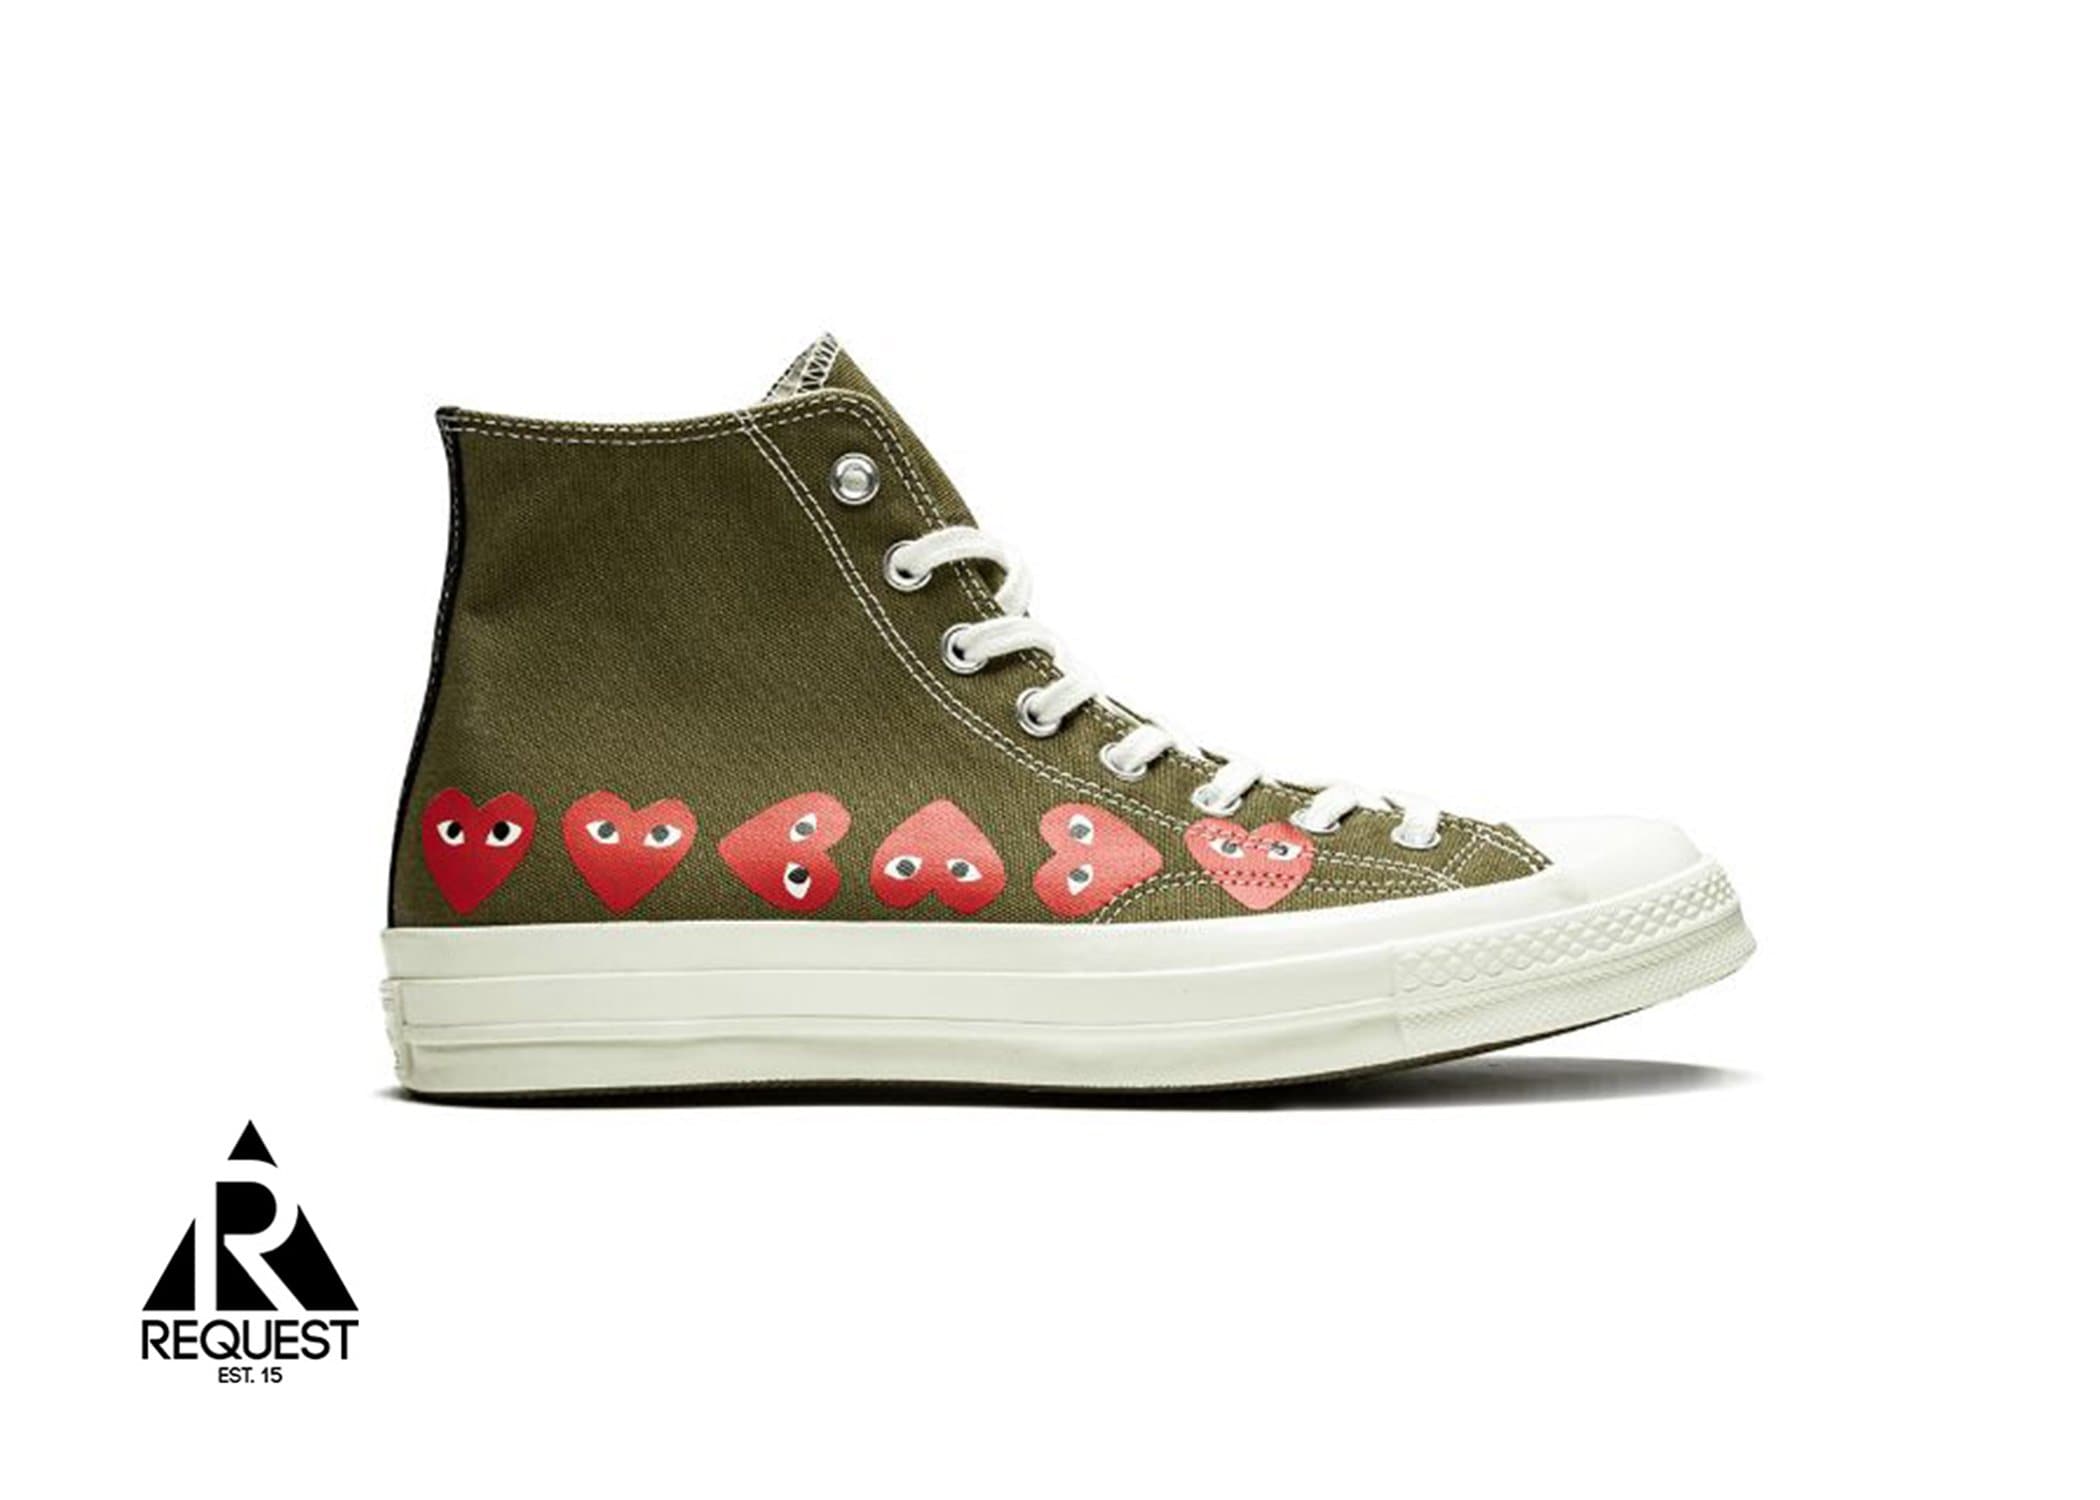 Converse Chuck Taylor CDG High “Olive”